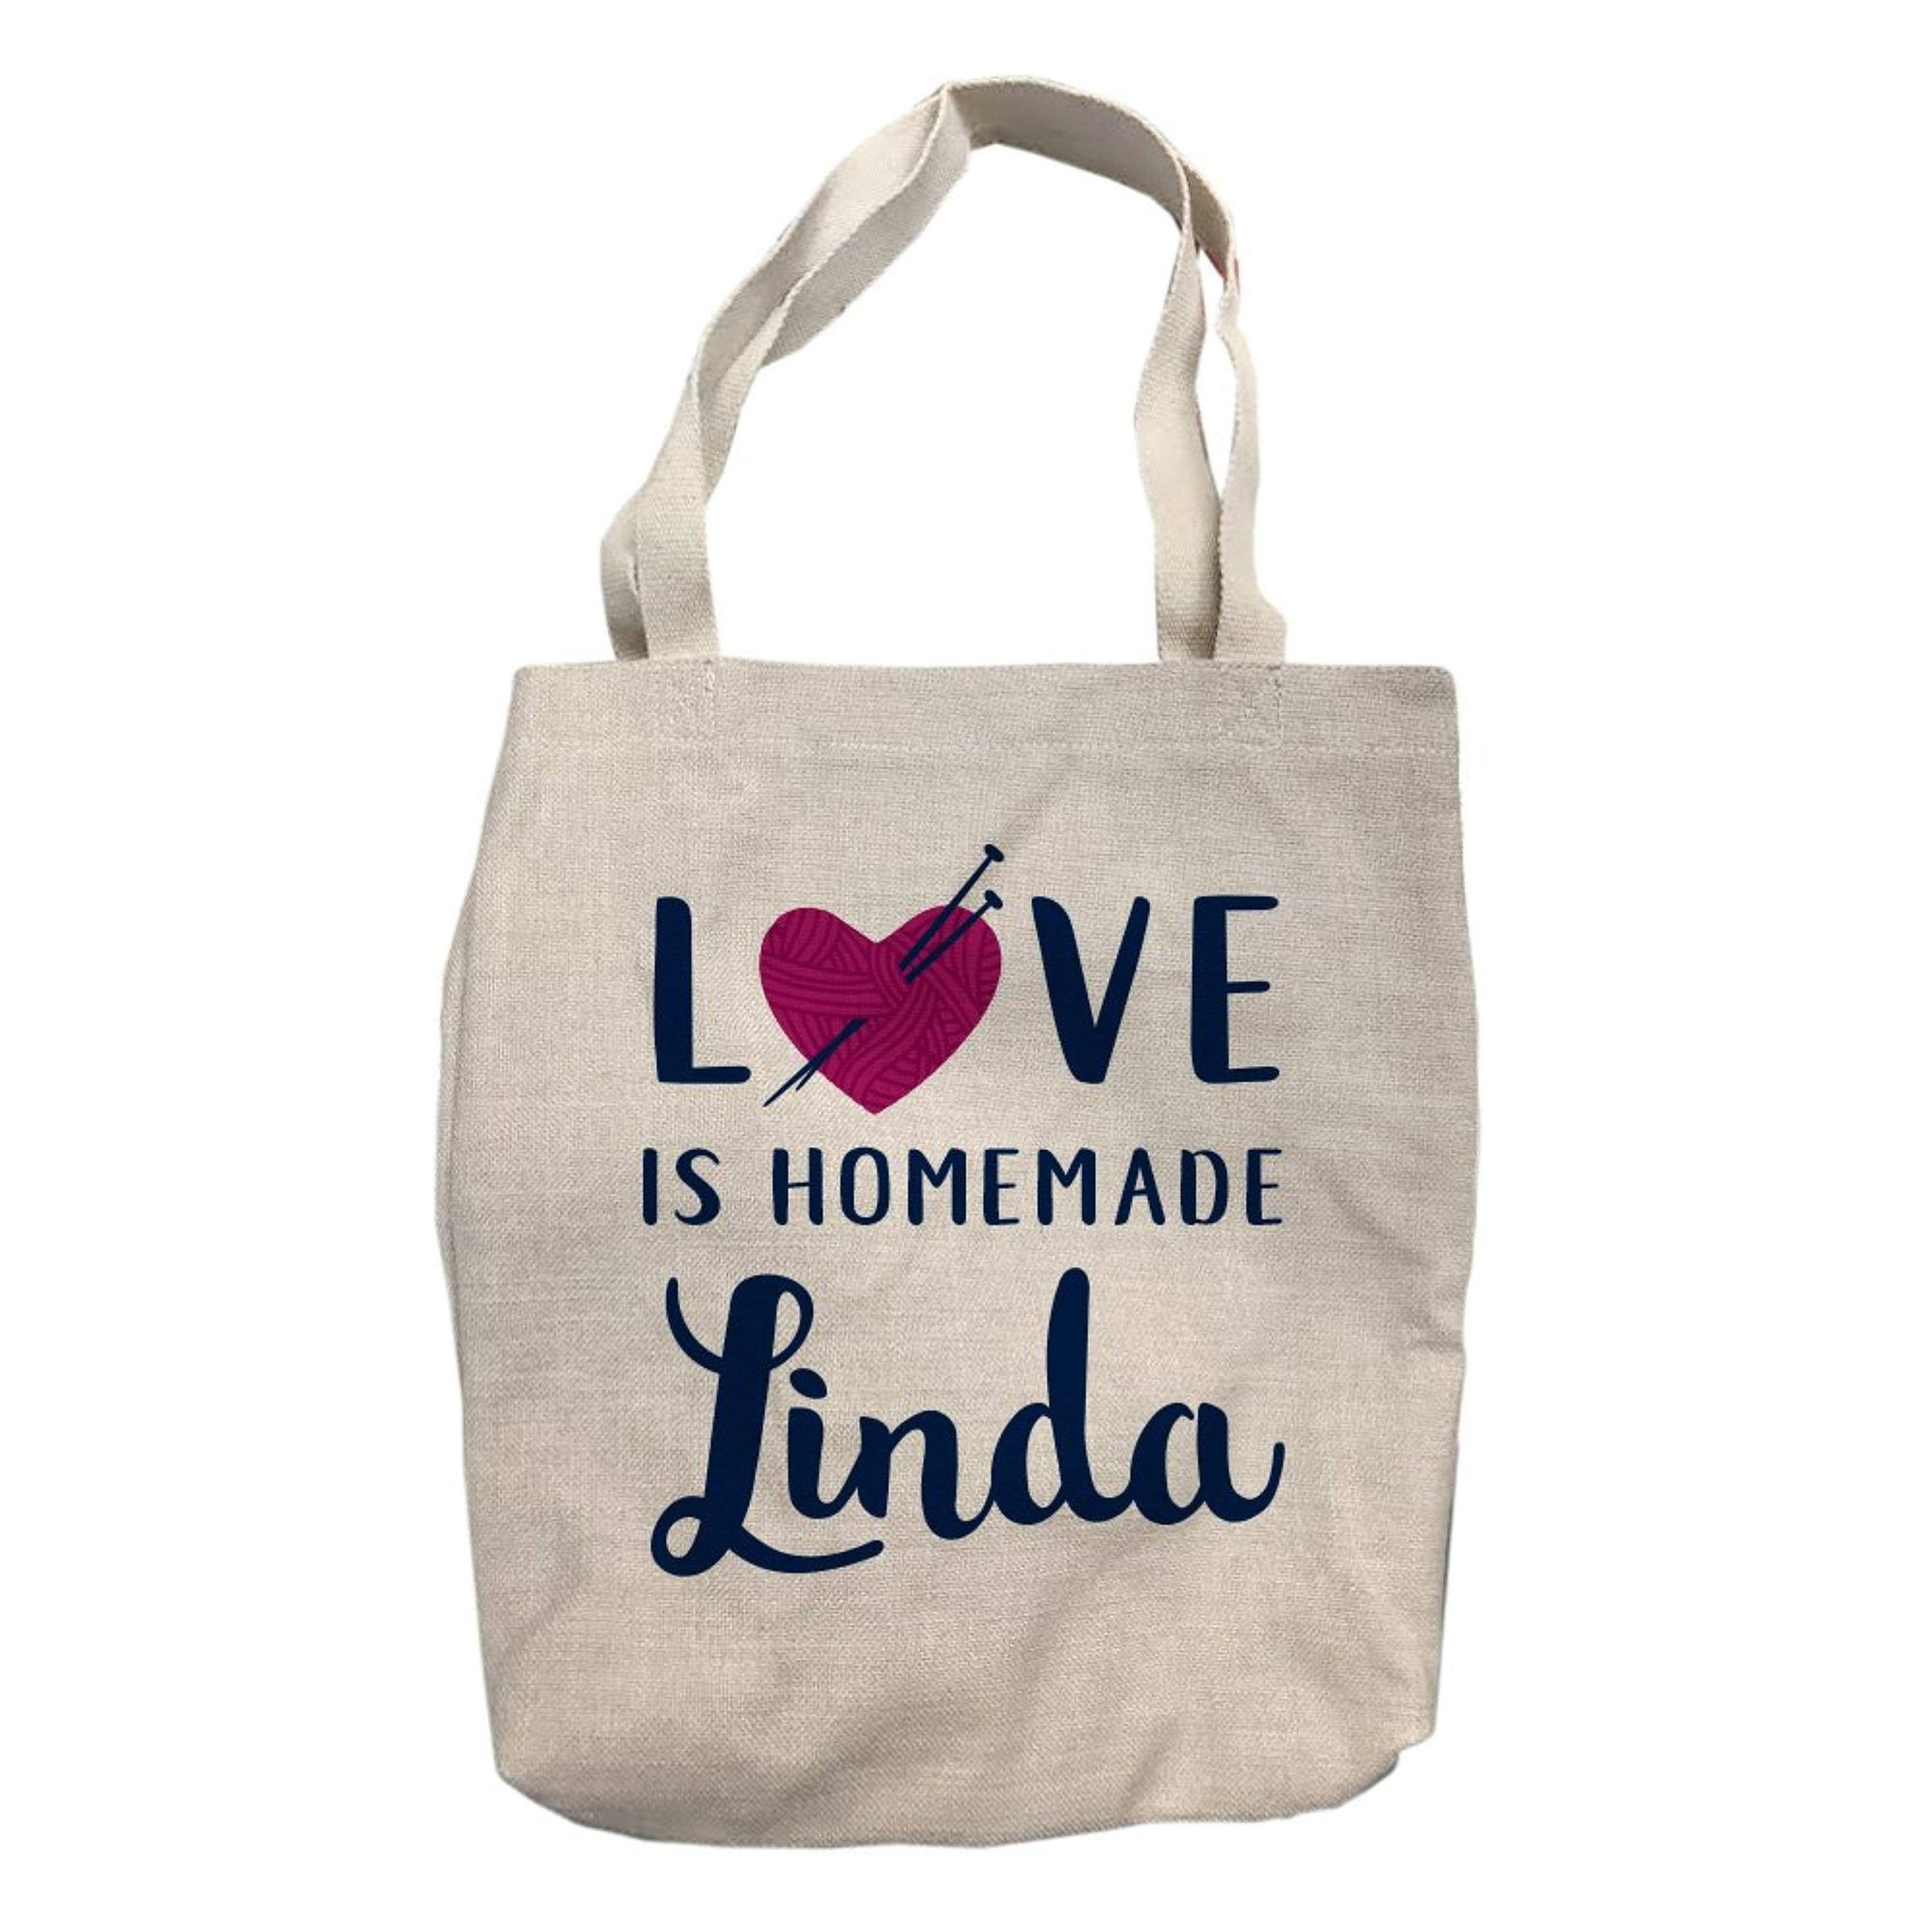 Personalized Love is Homemade Knitting Tote Bag